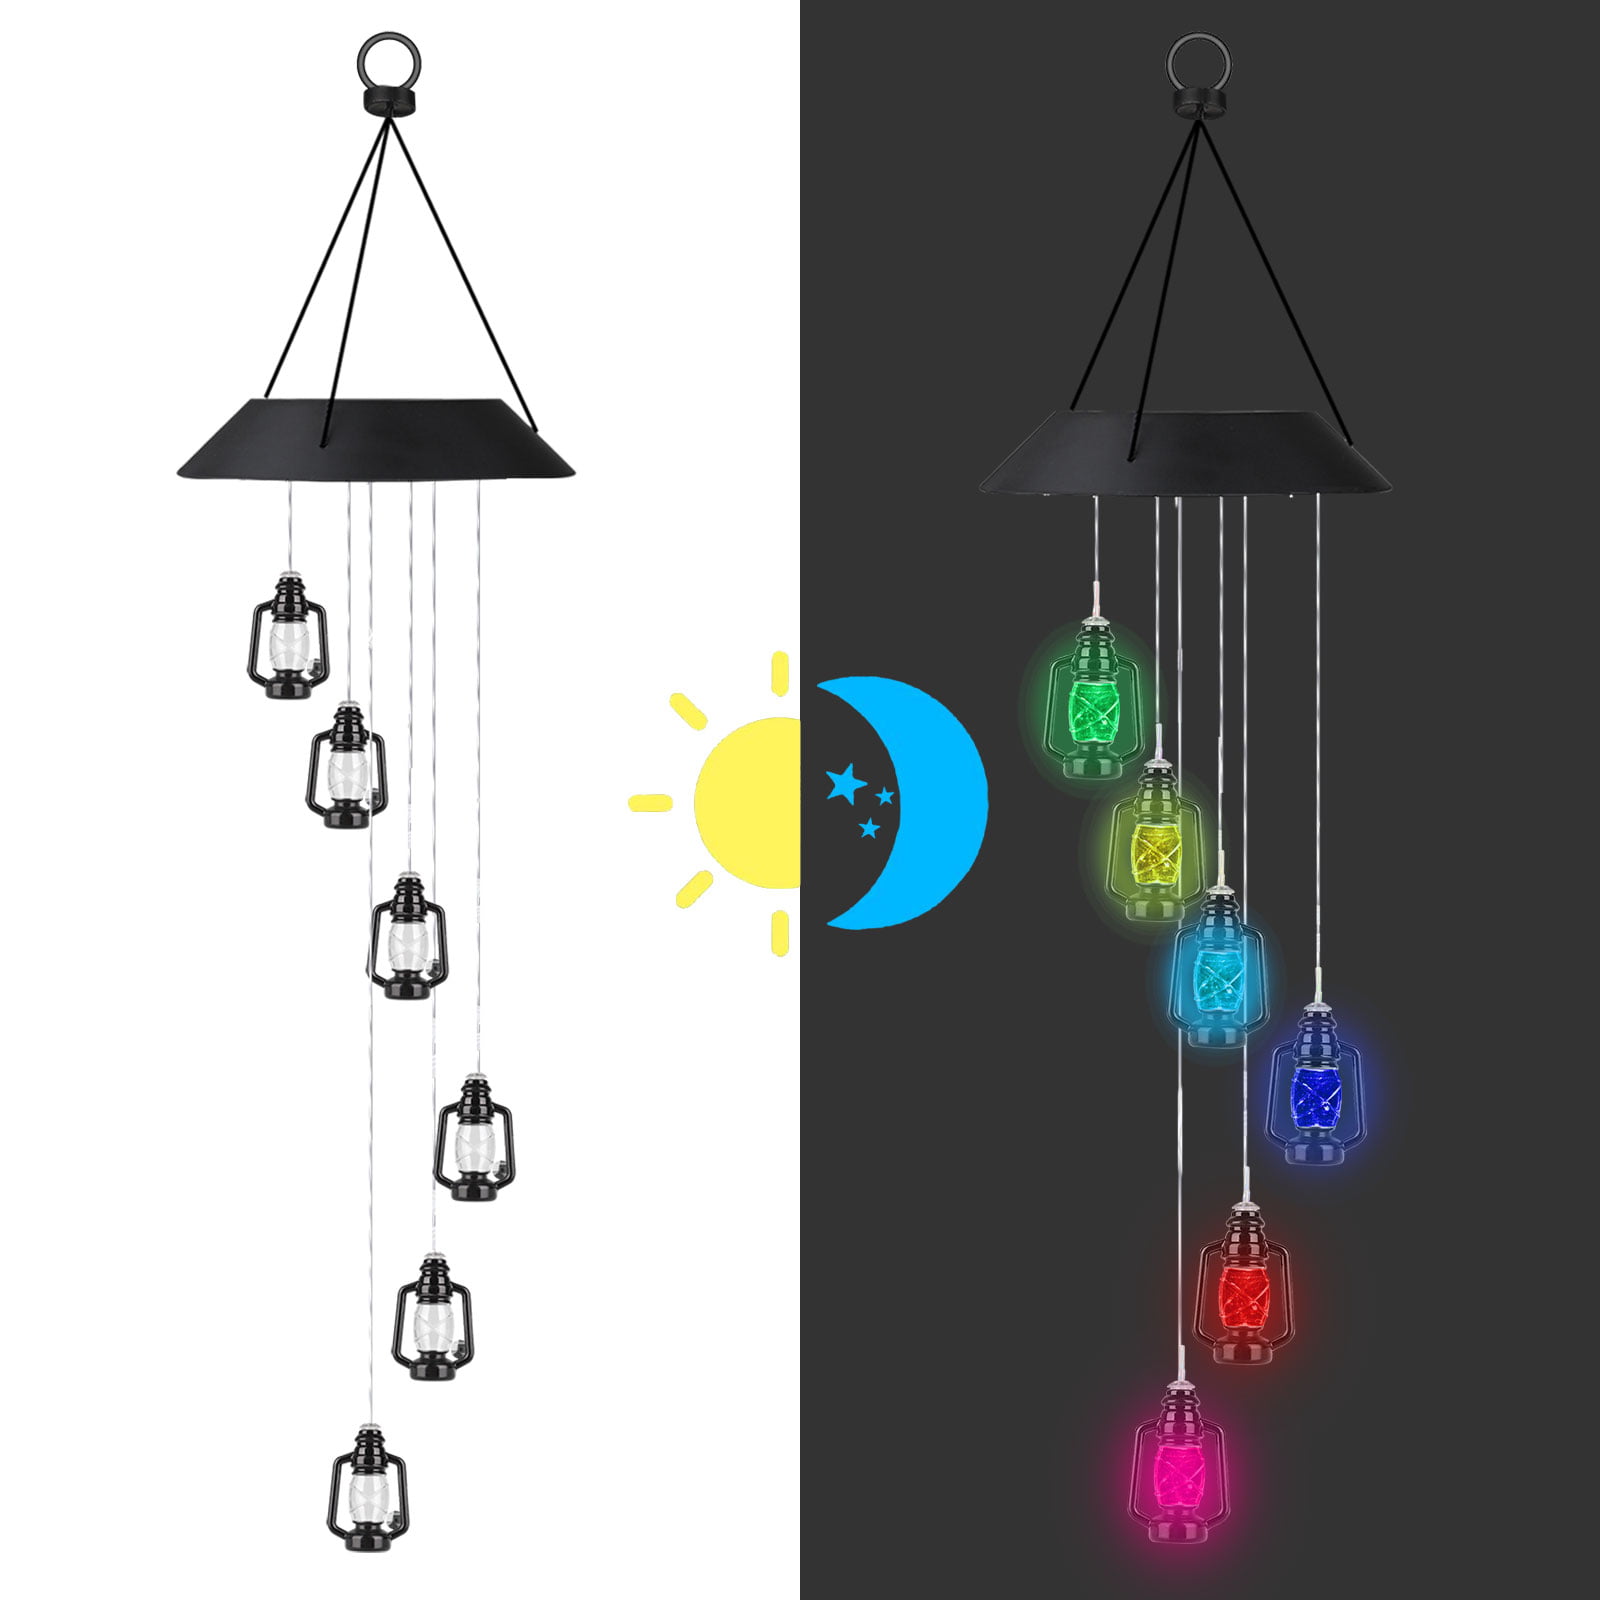 Wind Chime Solar Light Swonuk Outdoor Color-Changing LED Wind Chime Decorative Windbell Light for Garden Patio Deck Yard Type 1